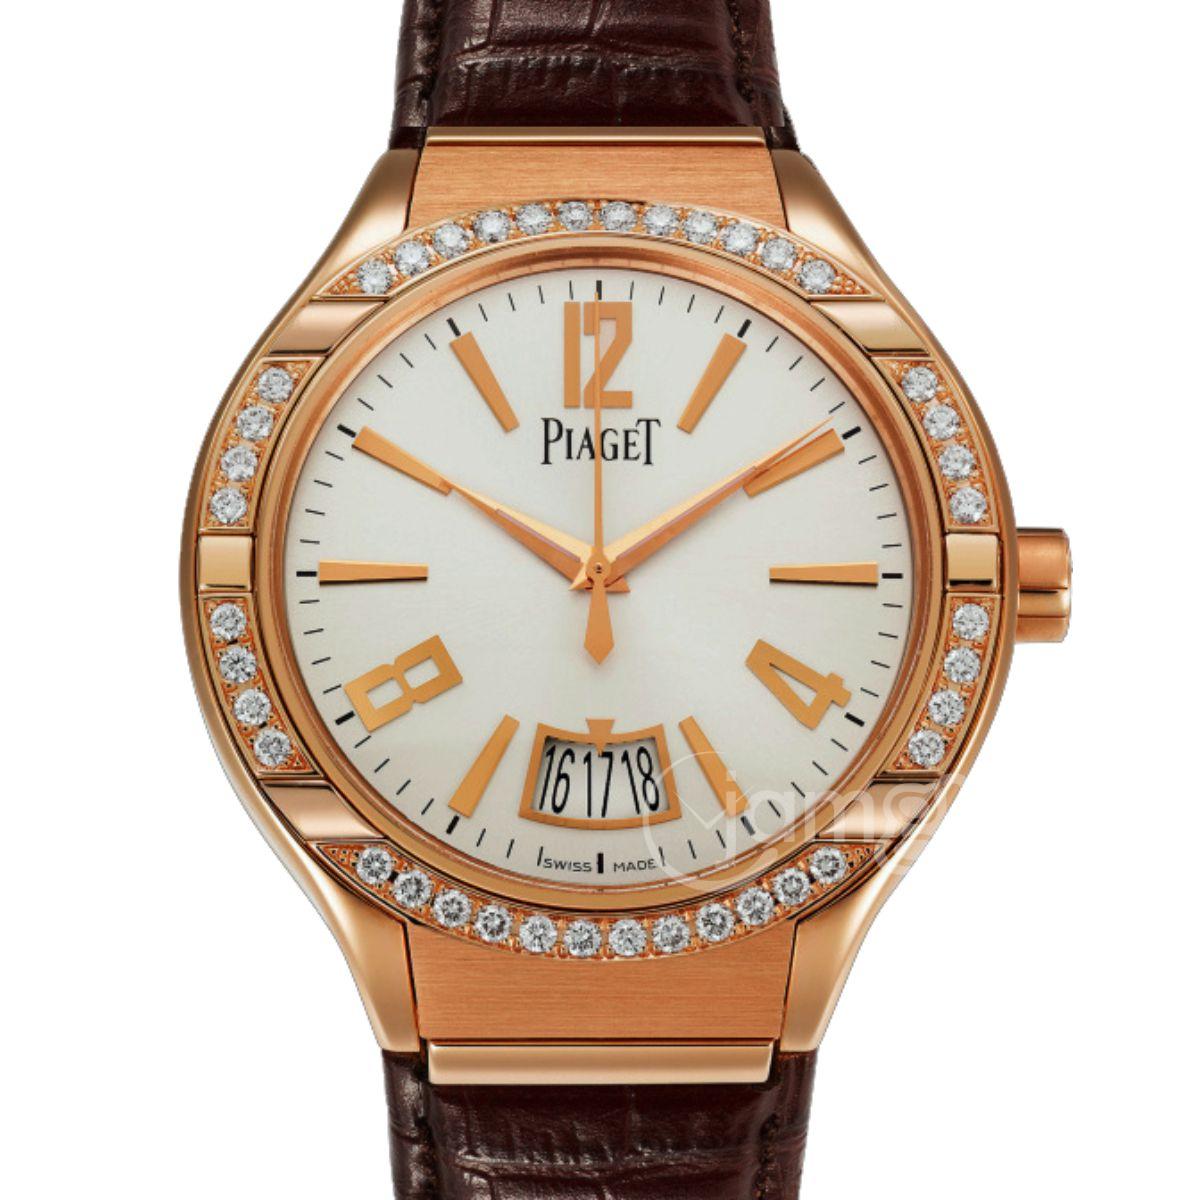 Polo Date Automatic Men's in Rose Gold with Diamond Bezel on Brown Crocodile Leather Strap with White Dial